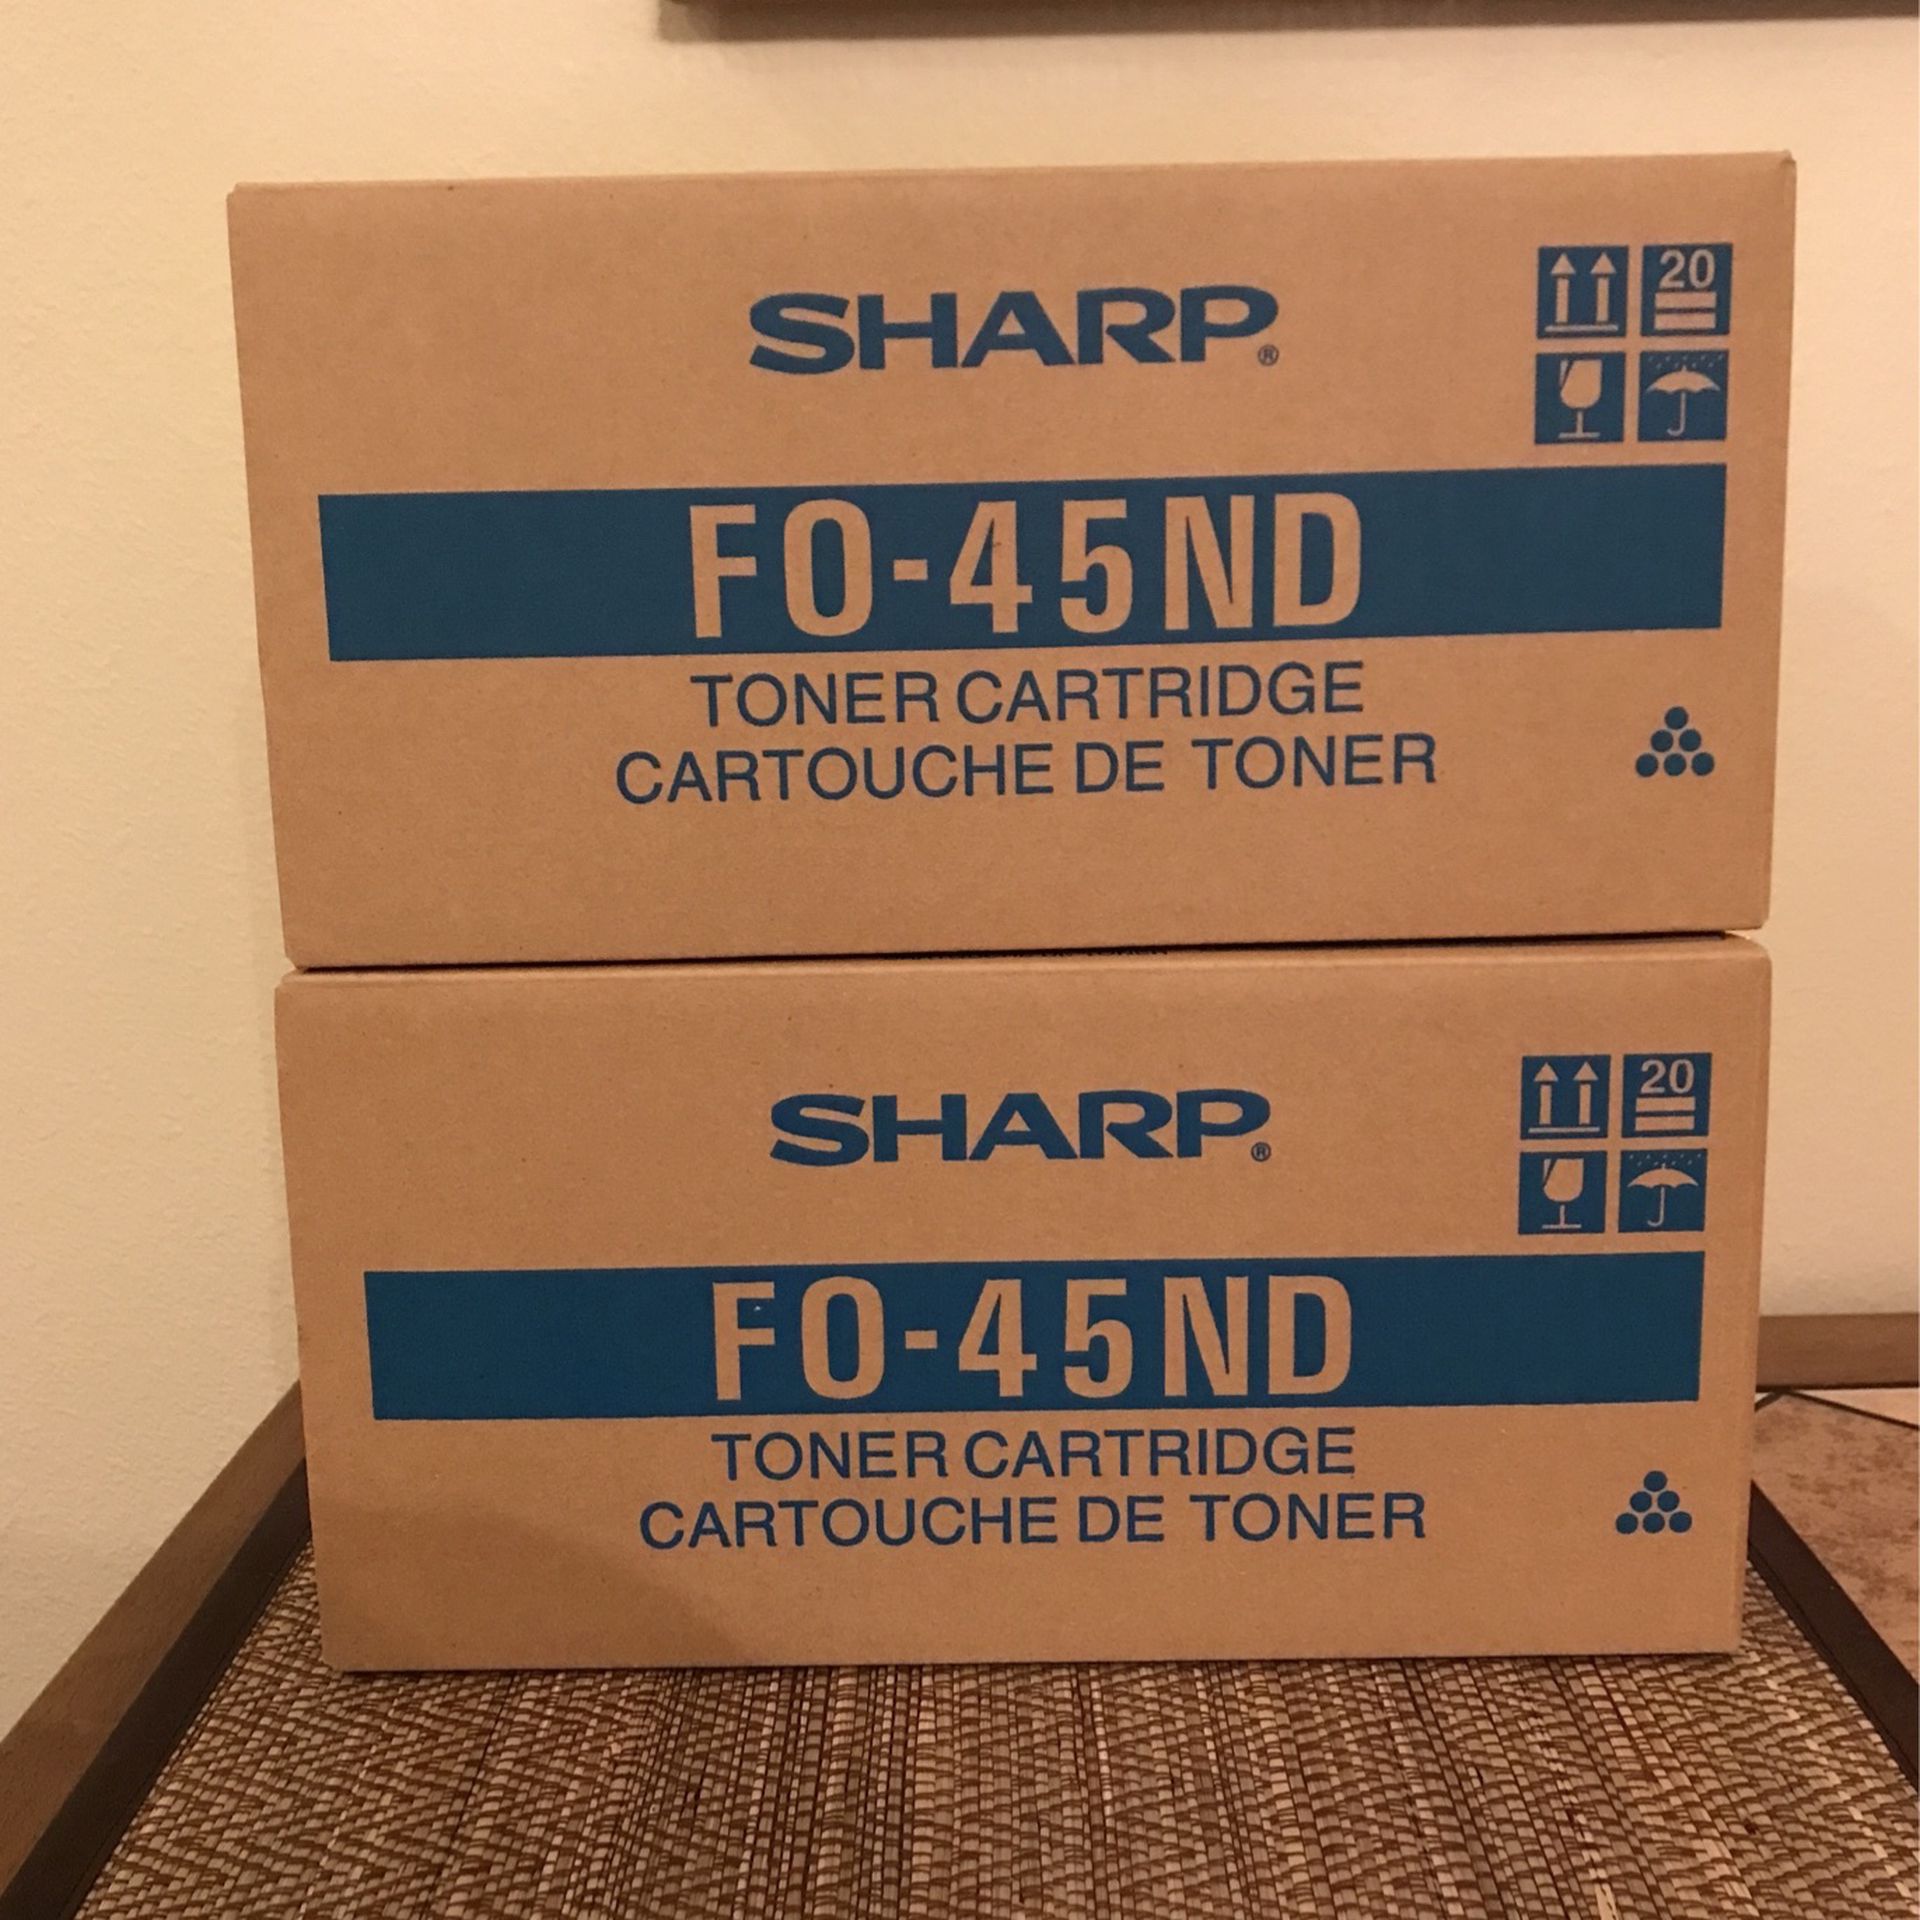 Sharp Toner Cartridge FO-45ND Set Of 2 Color Blk New For Fax Machines